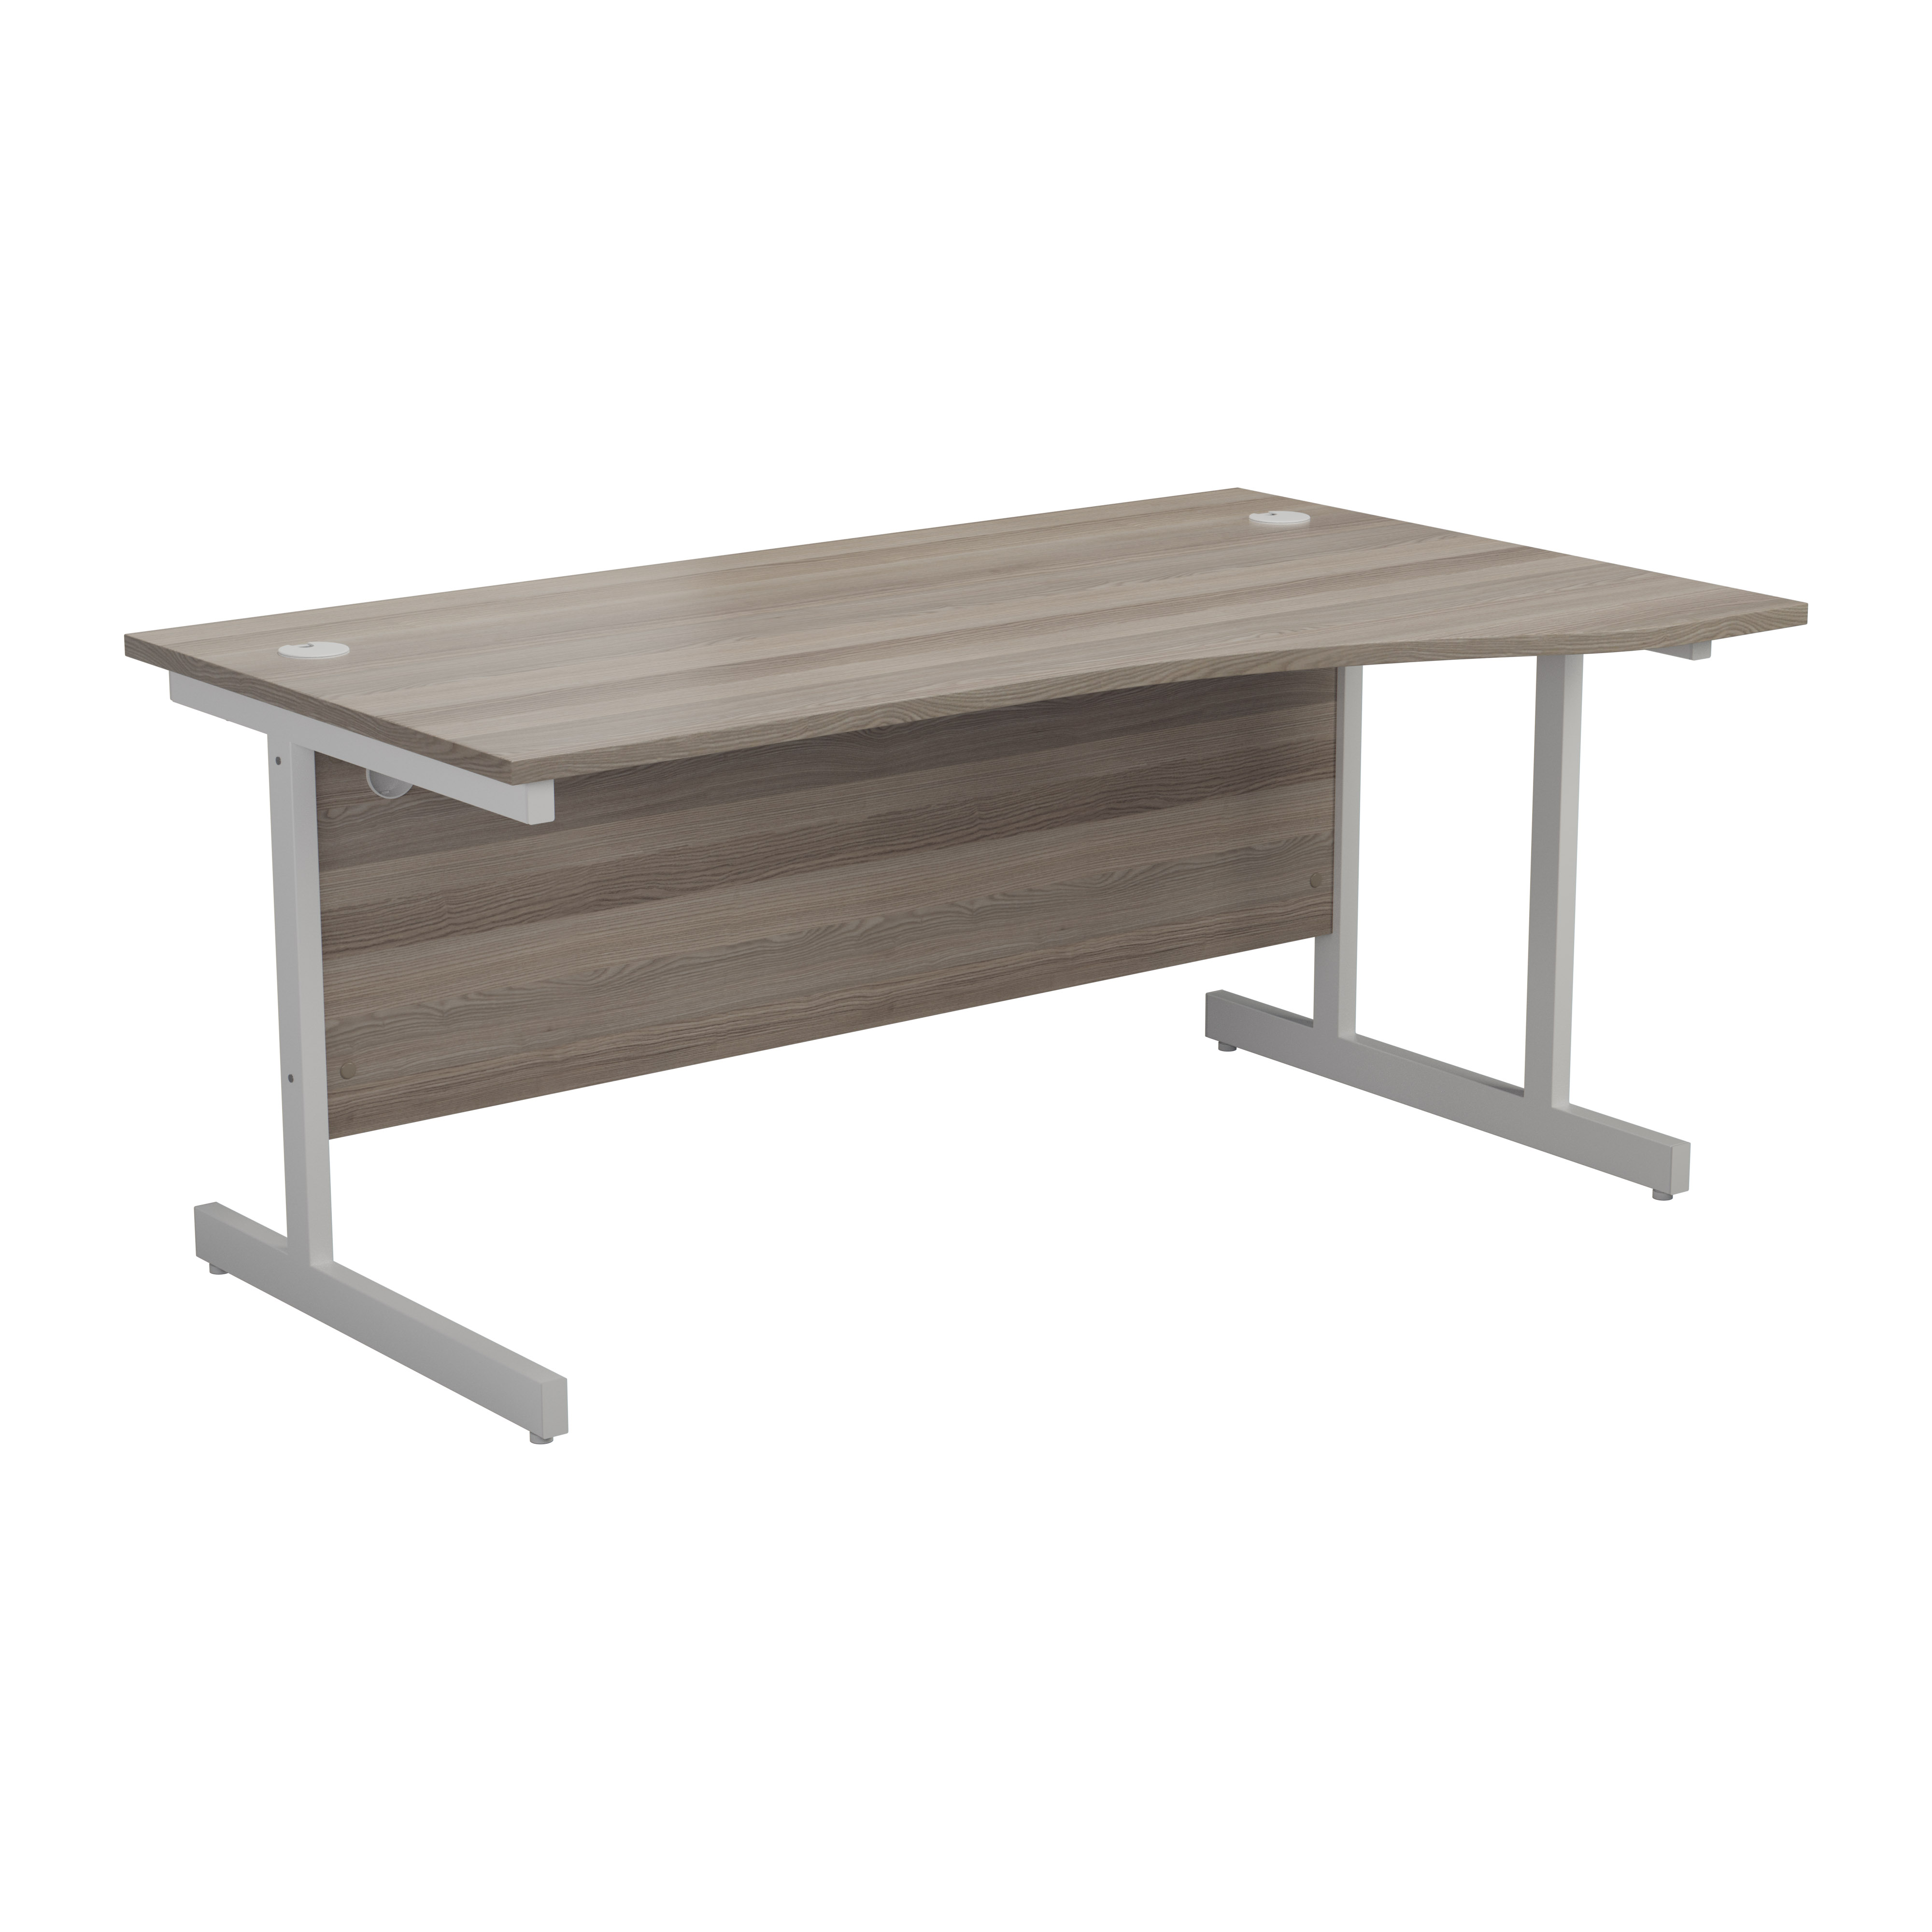 One Cantilever 1600 RH Wave Cantilever Workstation - Grey Oak Top White Legs